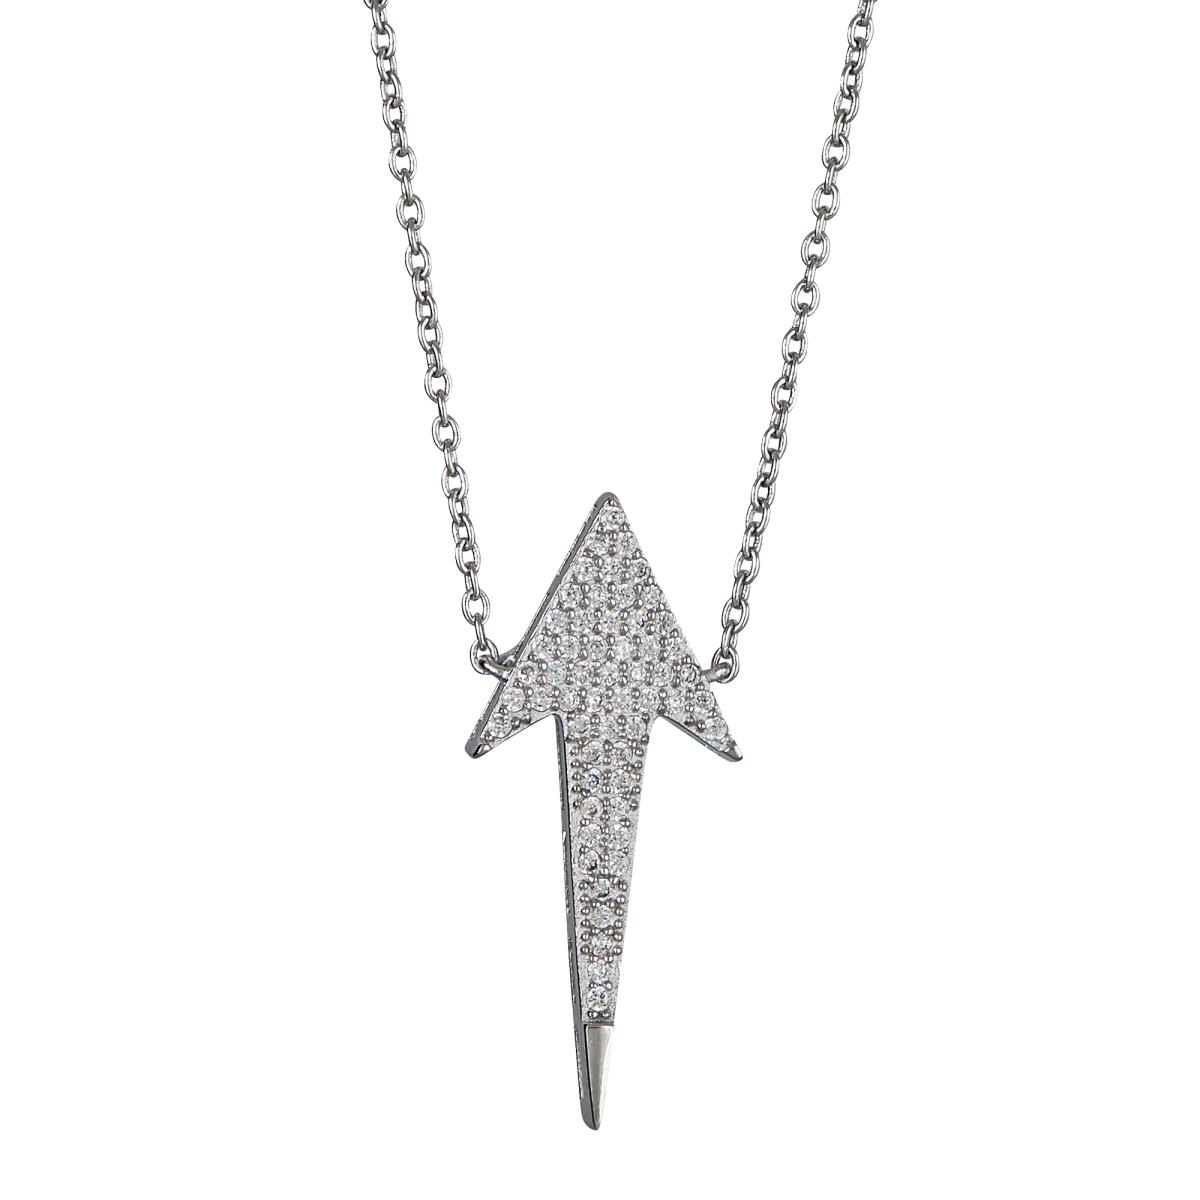 Sterling Silver Arrow Necklace